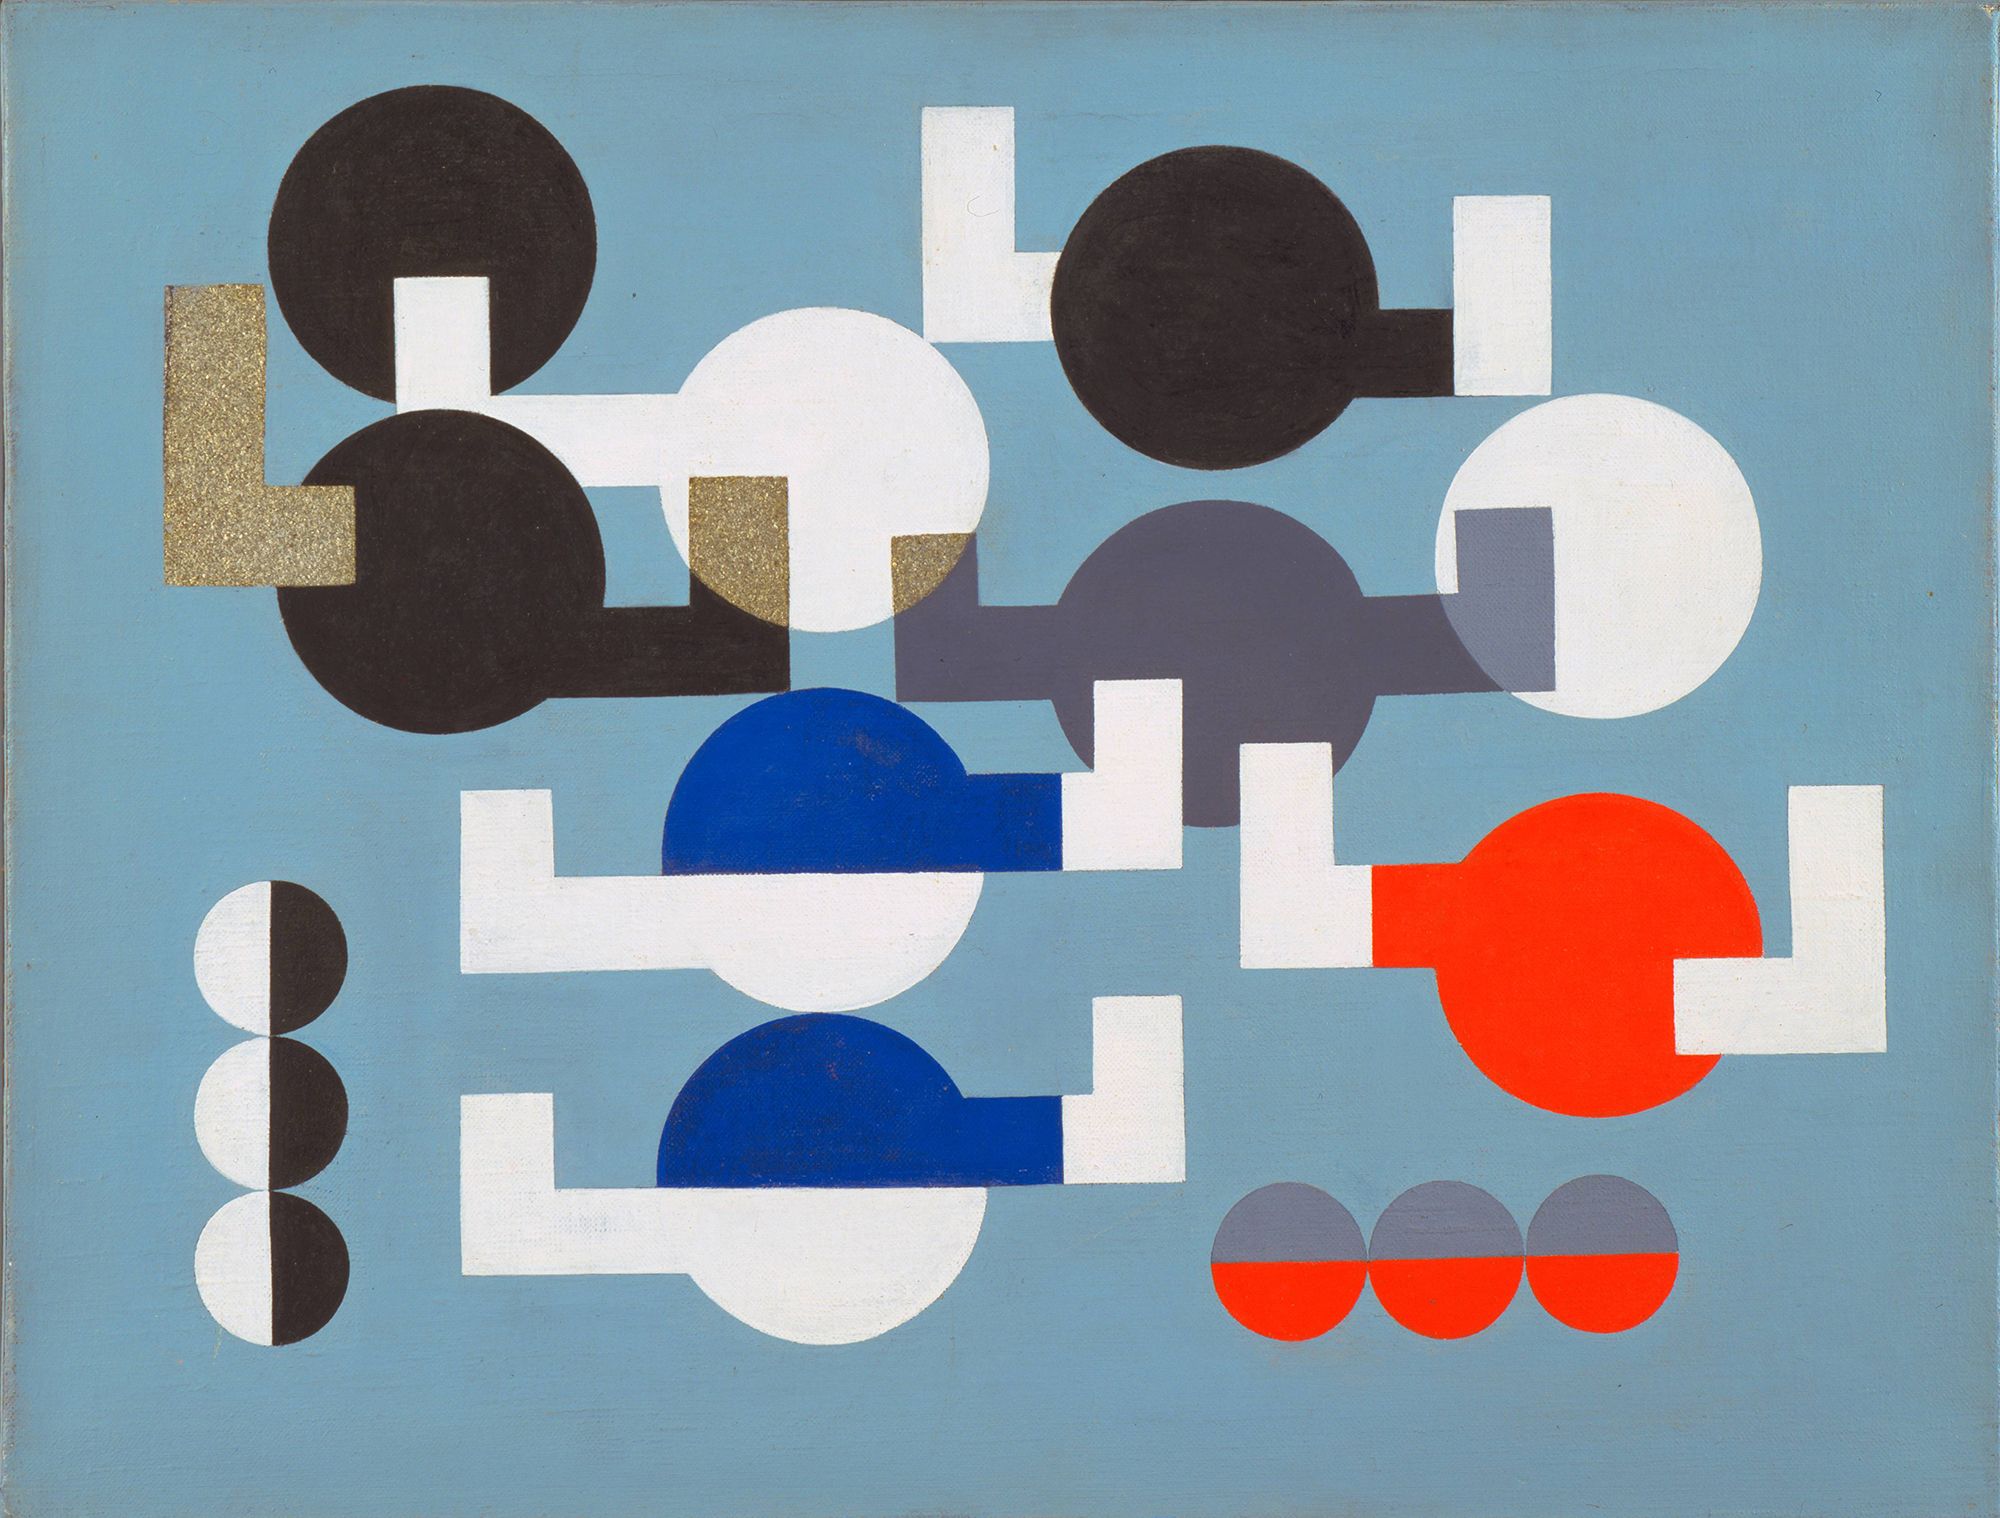 The Wick - Sophie Taeuber-Arp, Composition of Circles and Overlapping Angles